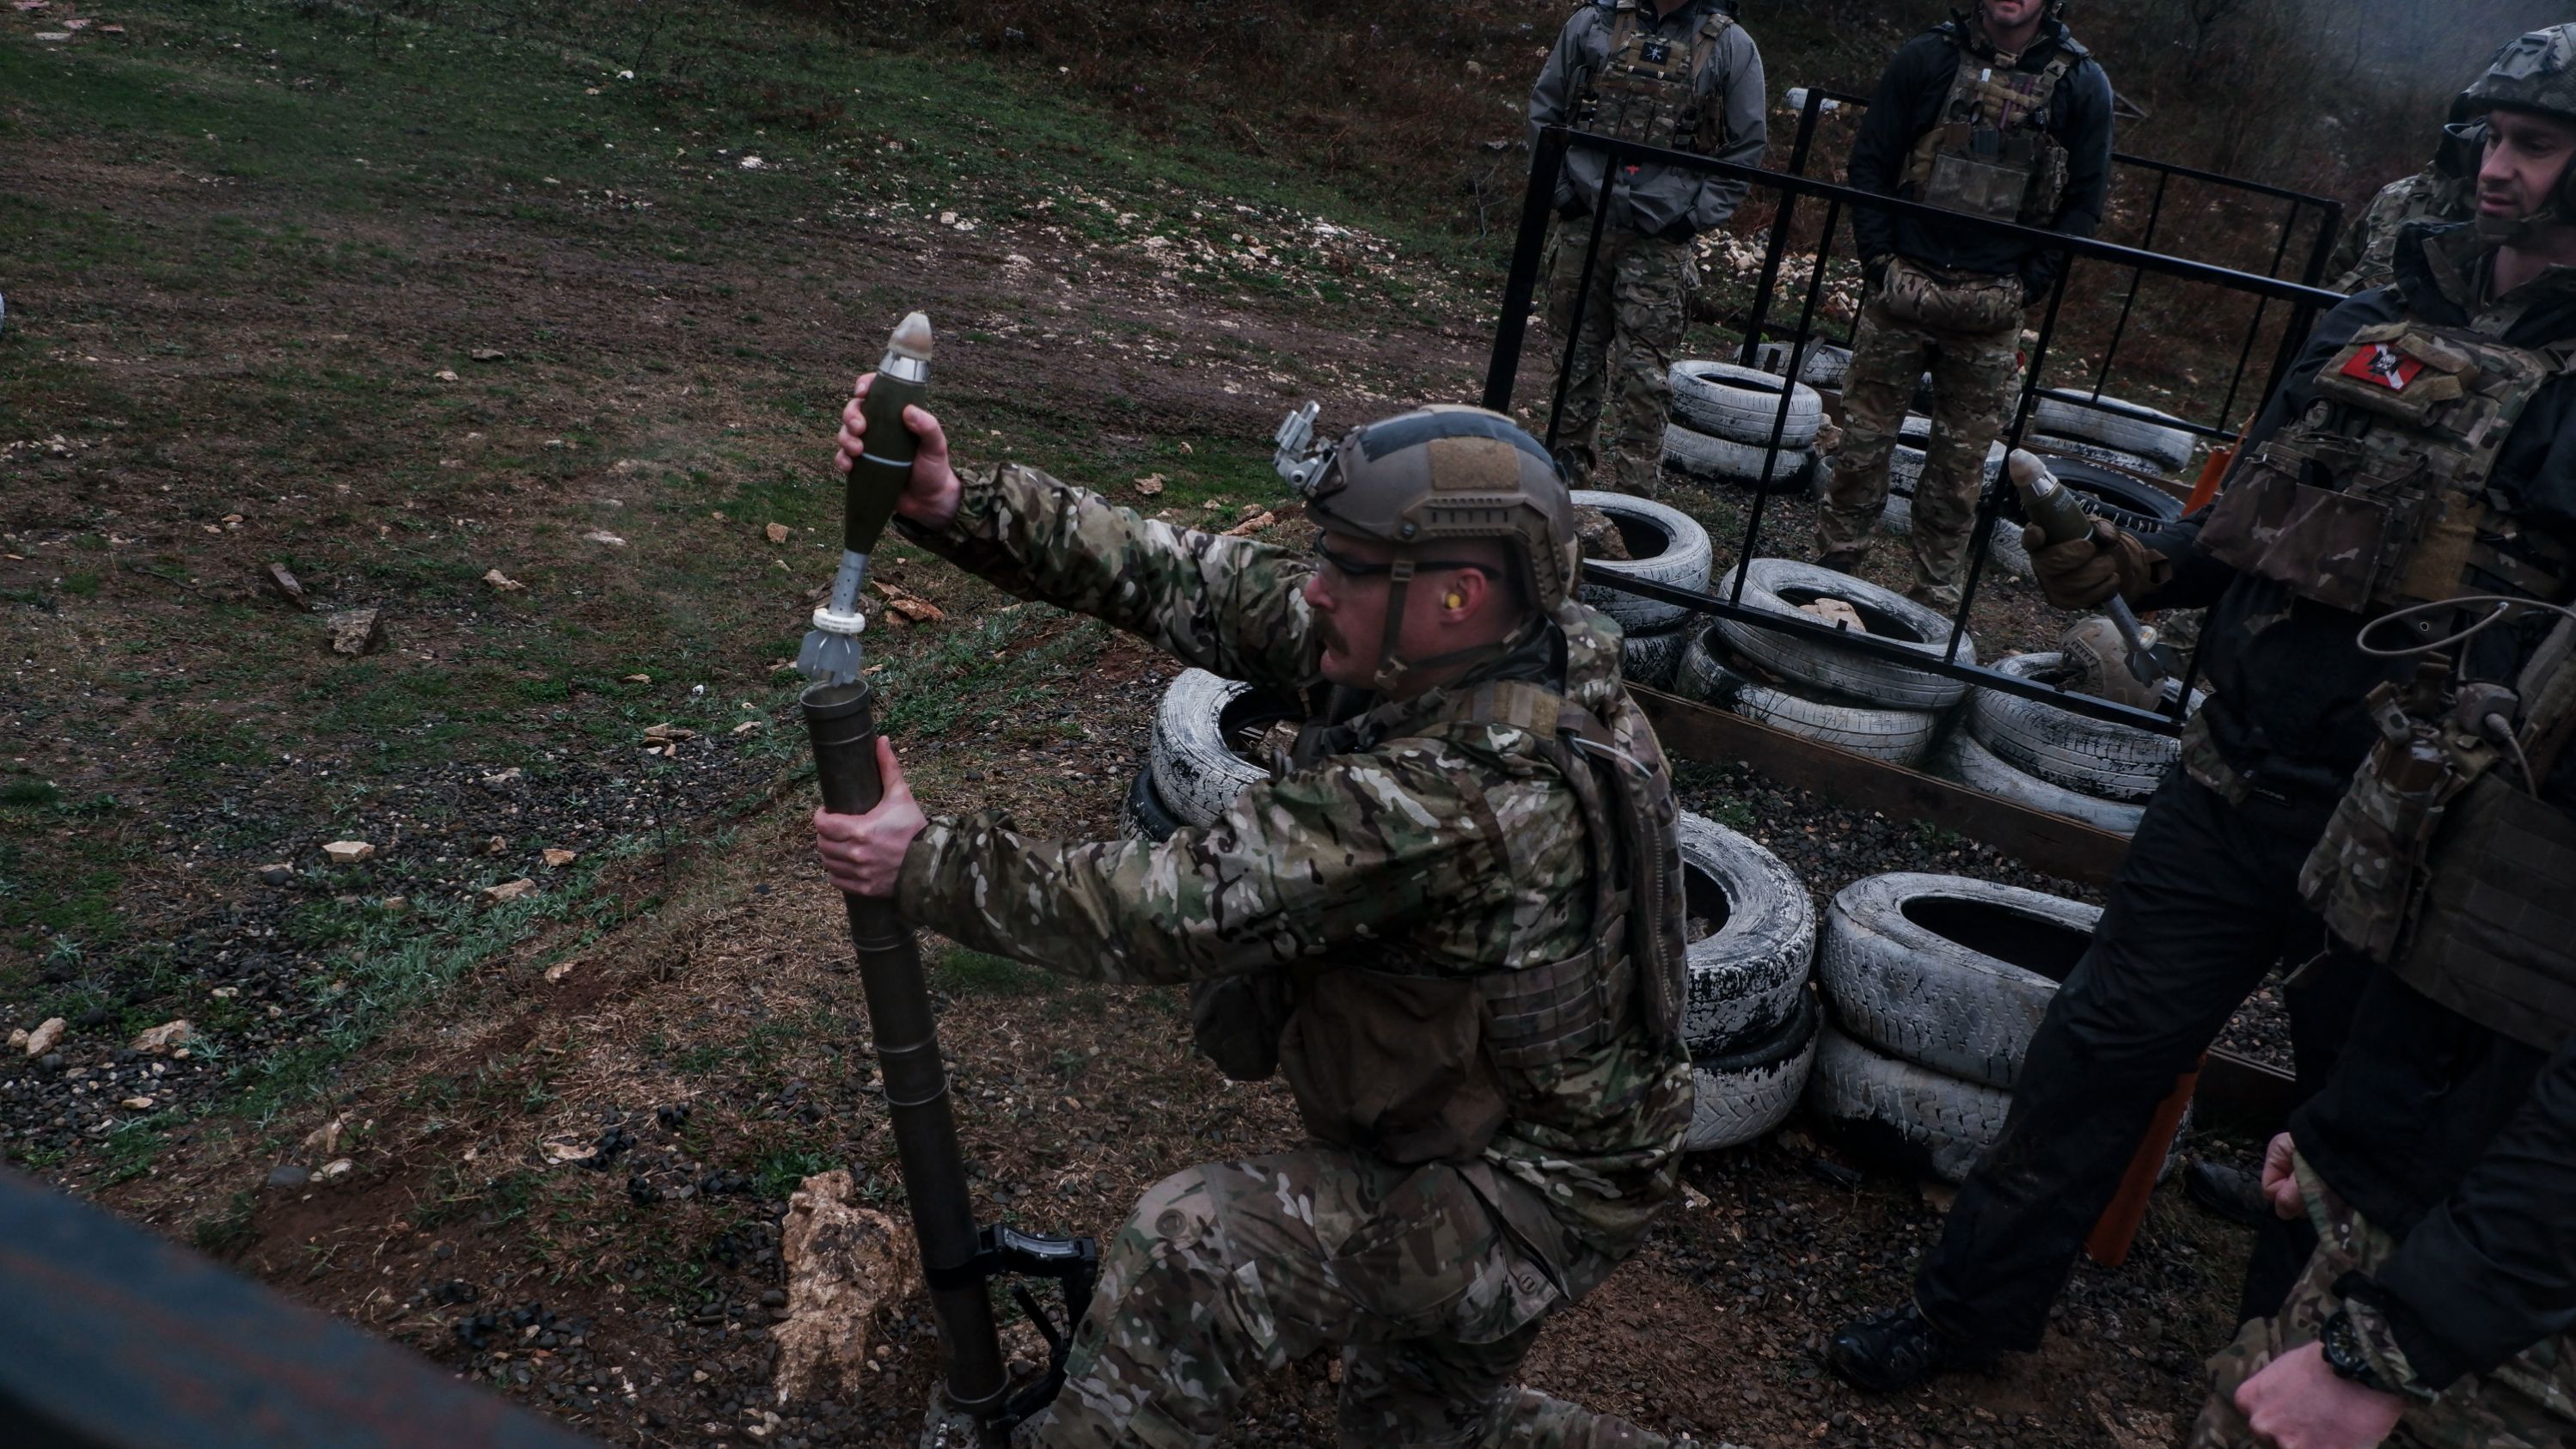 A Green Beret assigned to 10th Special Forces Group (Airborne) loads a 60-mm mortar round in Navenakhevi, Georgia, March 20, 2023. Combined training between U.S. Army Special Forces and Georgian Special Operations Forces increased anti-armor weapon systems and indirect fire interoperability. (U.S. Army photo by Spc. Jordan S. Worthy) (This photo has been altered for security purposes.)